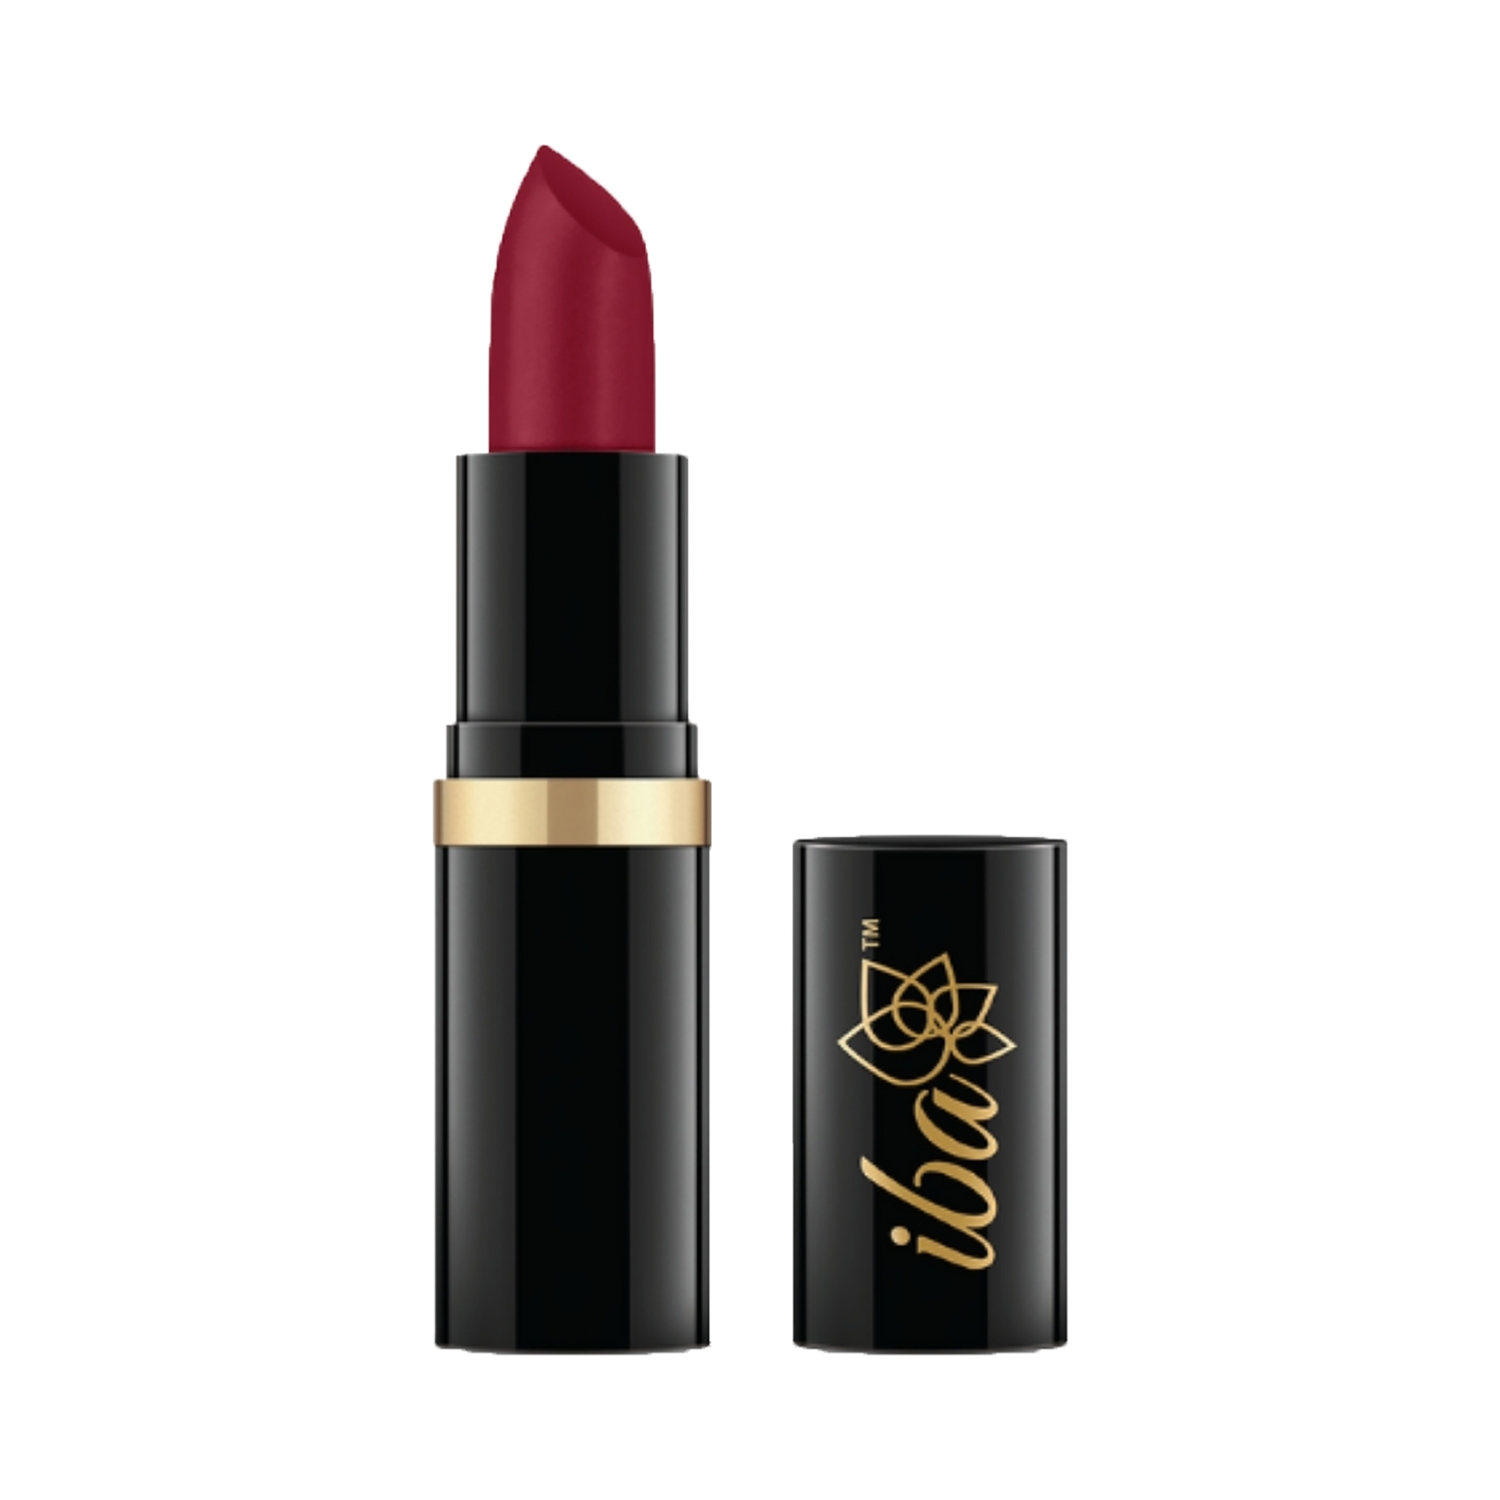 Iba | Iba Pure Lips Moisture Rich Lipstick - A68 Mystery Red (4g)